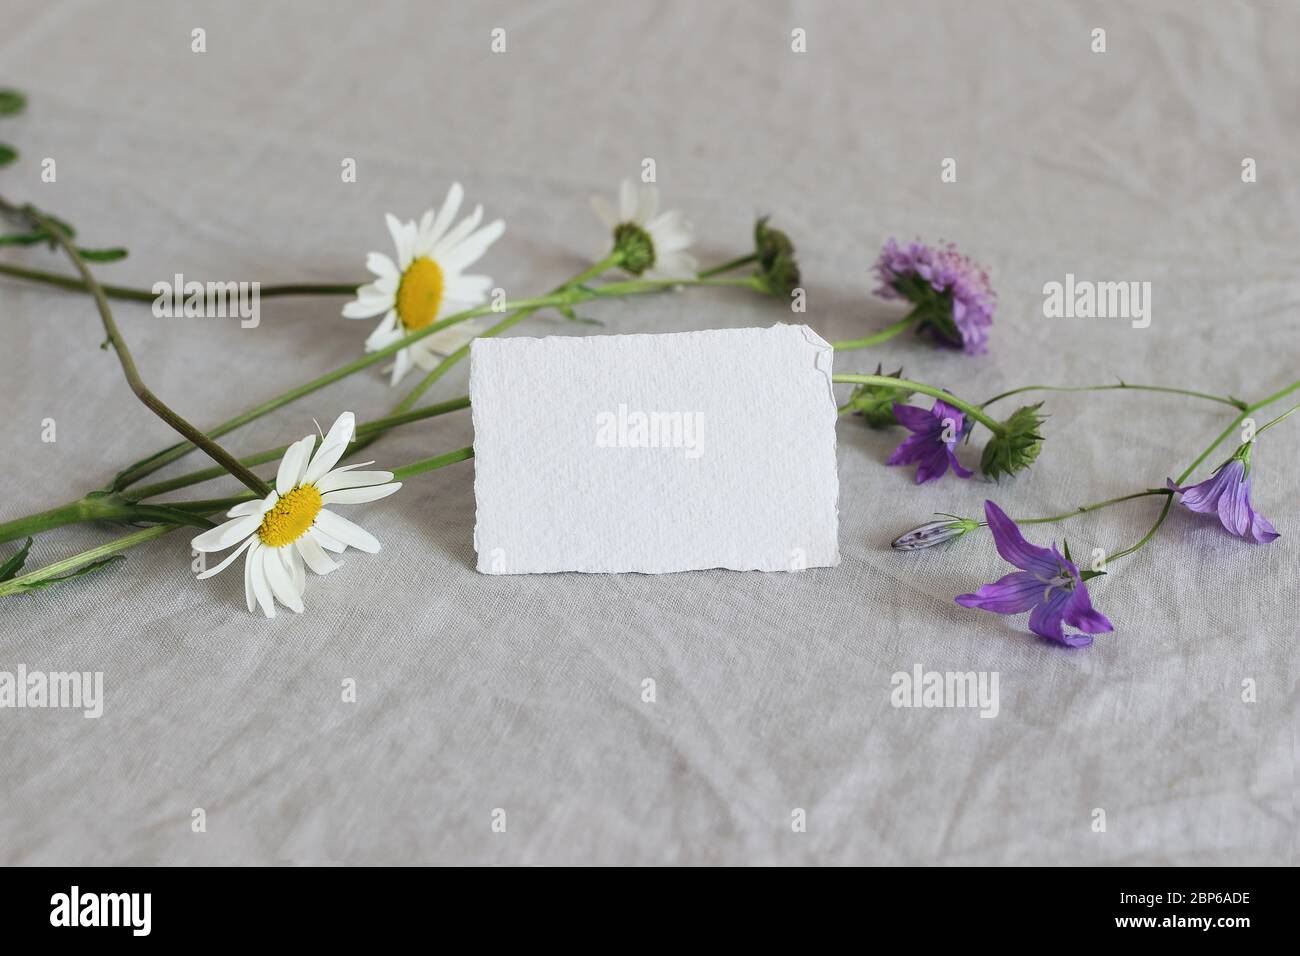 Spring, summer still life composition. Closeup of blank business, place card cotton paper mockup with wild flowers on linen table cloth. Daisies, blue Stock Photo